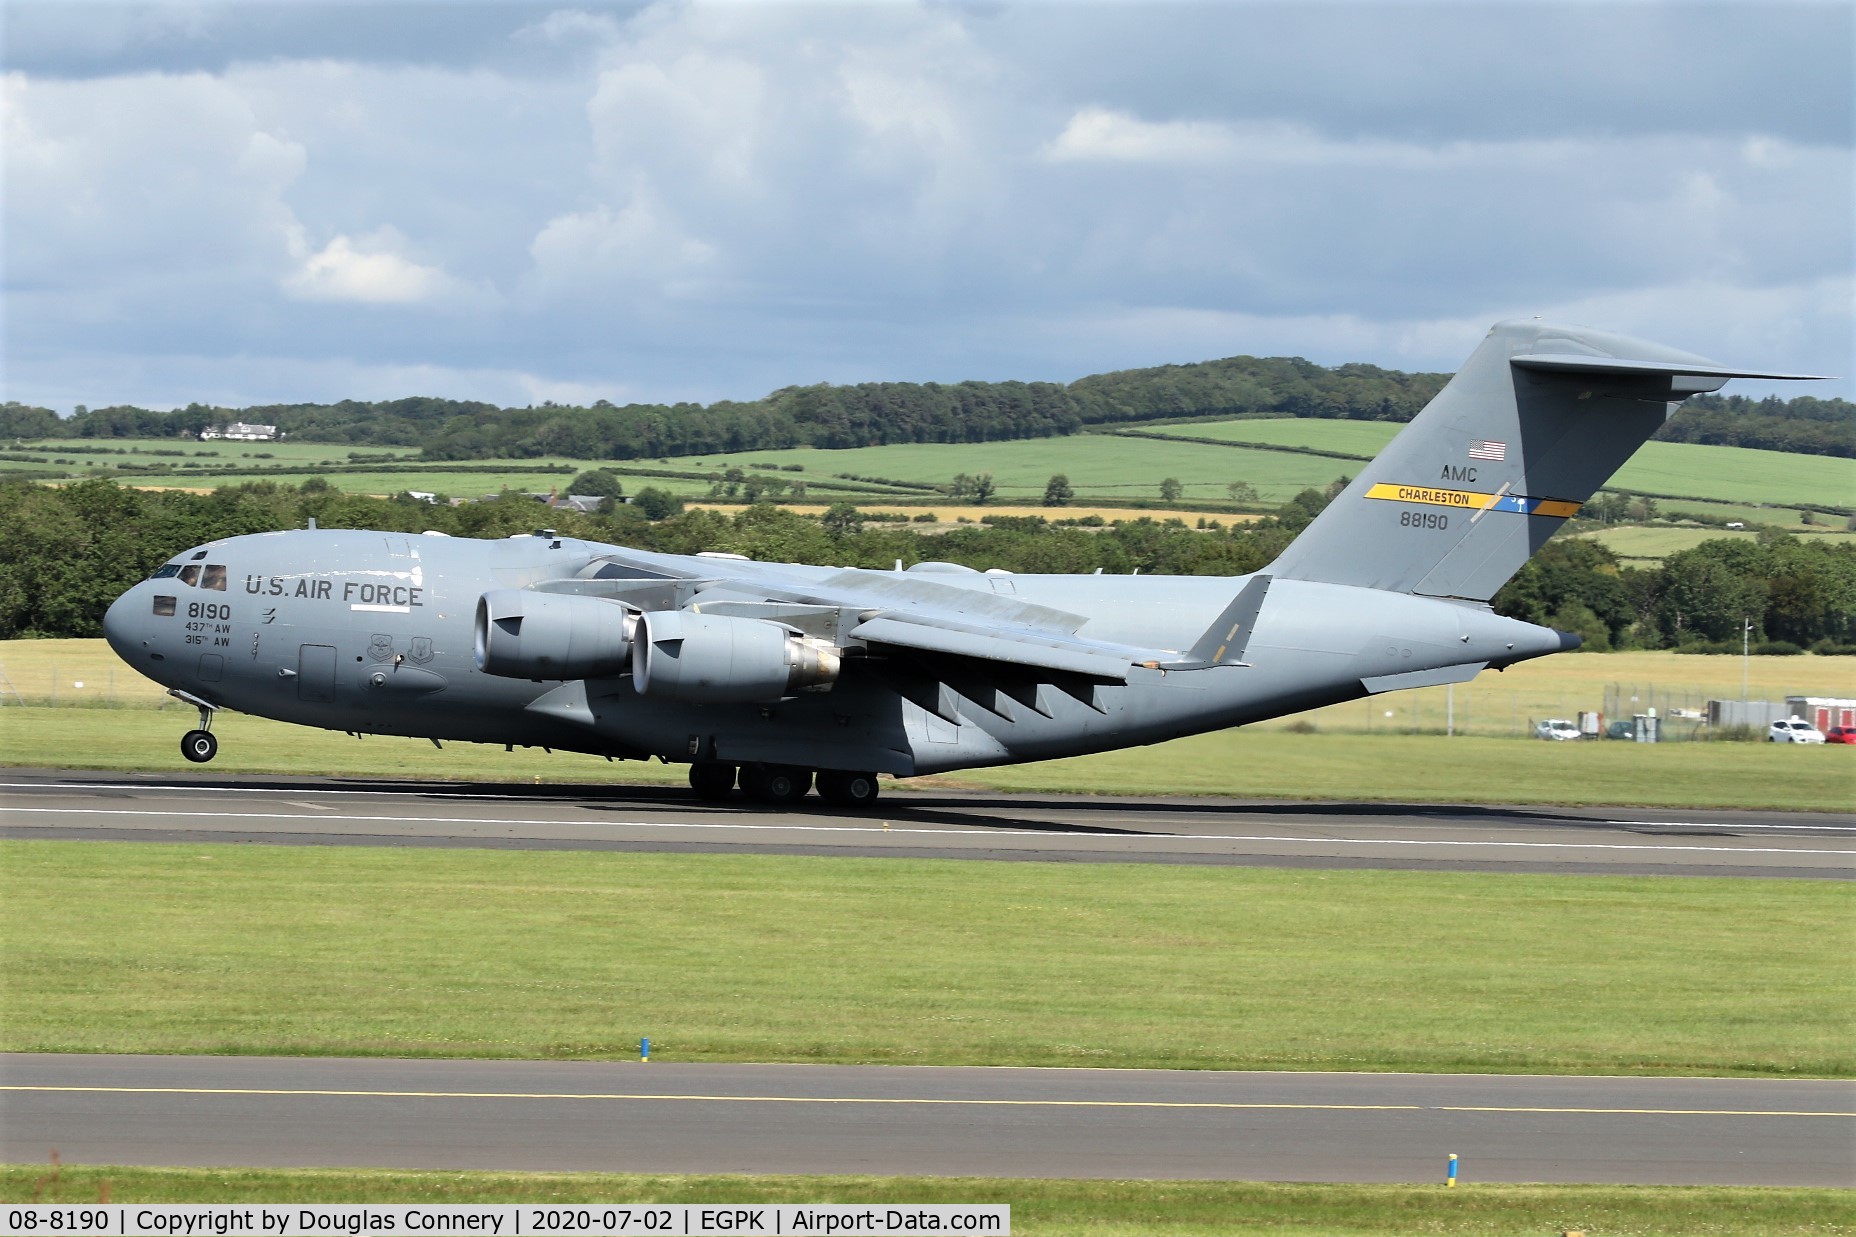 08-8190, 2008 Boeing C-17A Globemaster III C/N P-190/F212, Landing at Prestwick C/S RCH811 in for gas&go